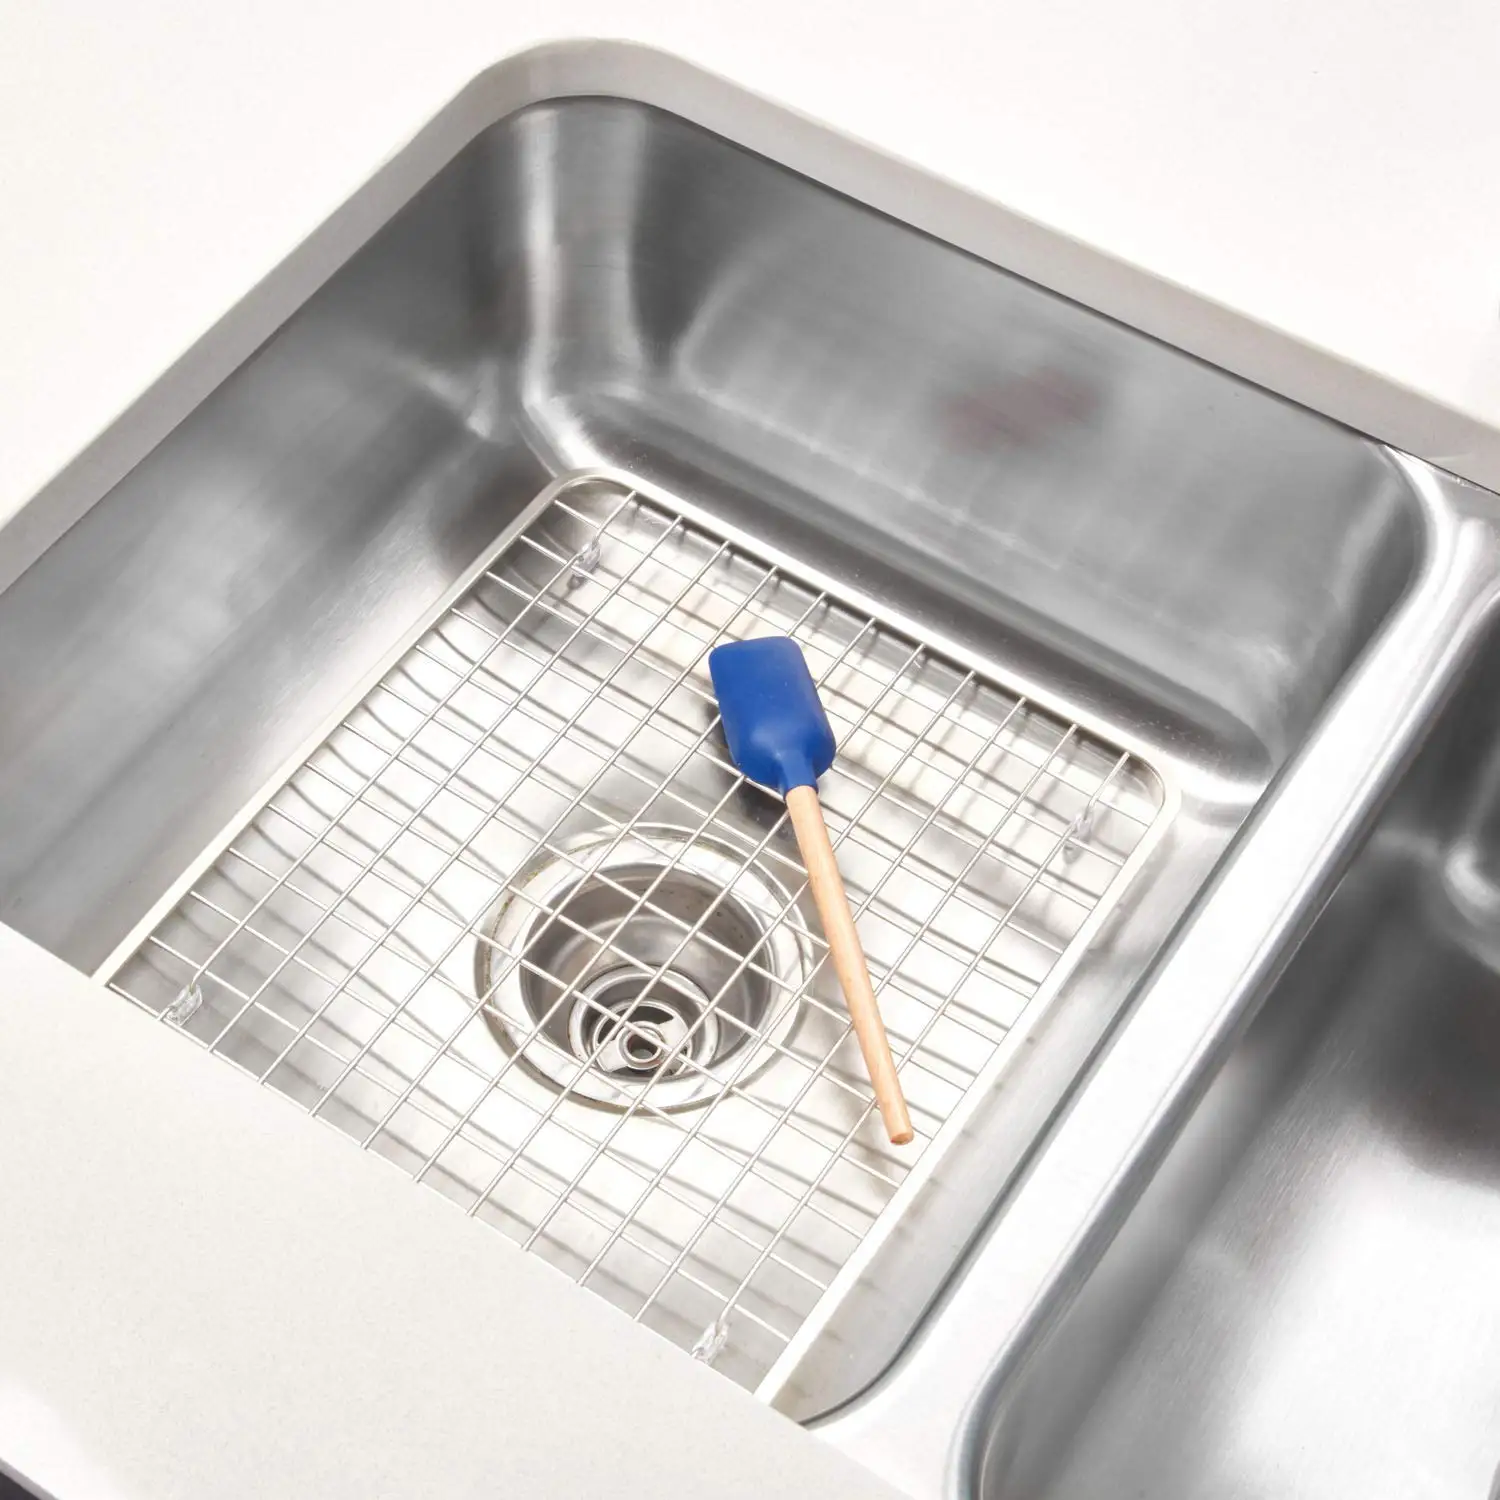 Manufacturer Kitchen Sink Protector Rack Wire Grid Mat With Center Drain Hole View Kitchen Sink Caizhu Product Details From Guangzhou Caizhu Hardware Handicraft Article Factory On Alibaba Com